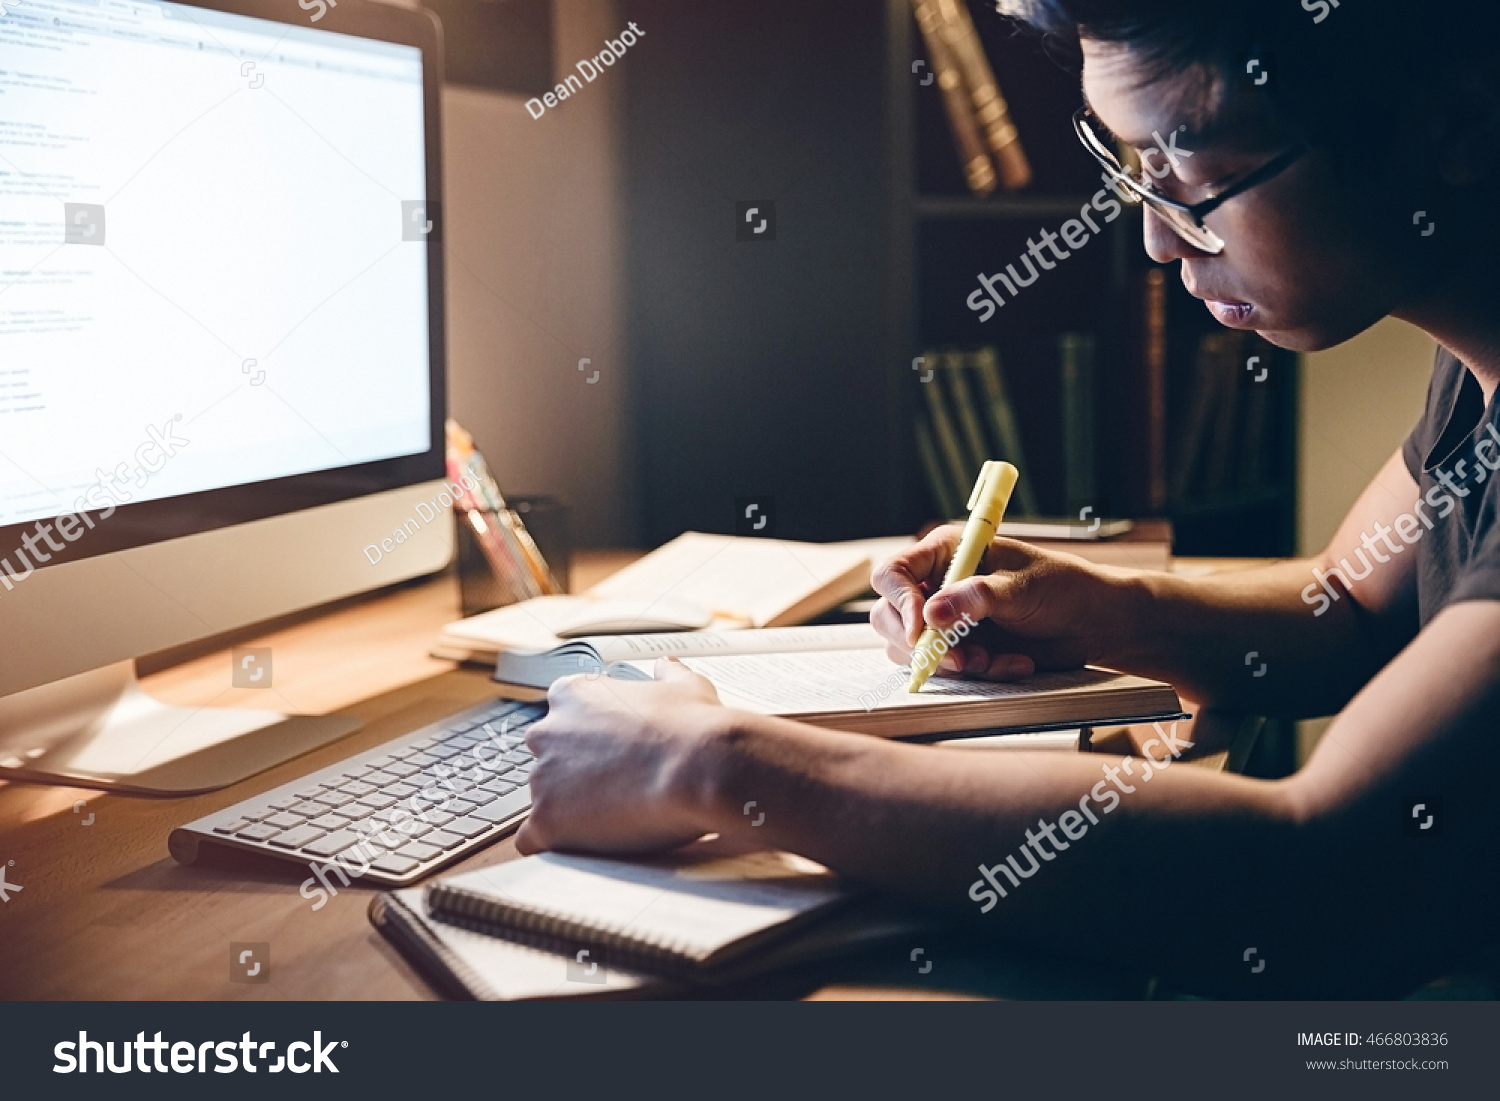 Serious asian young man studying with books and computer in dark room at home  #466803836